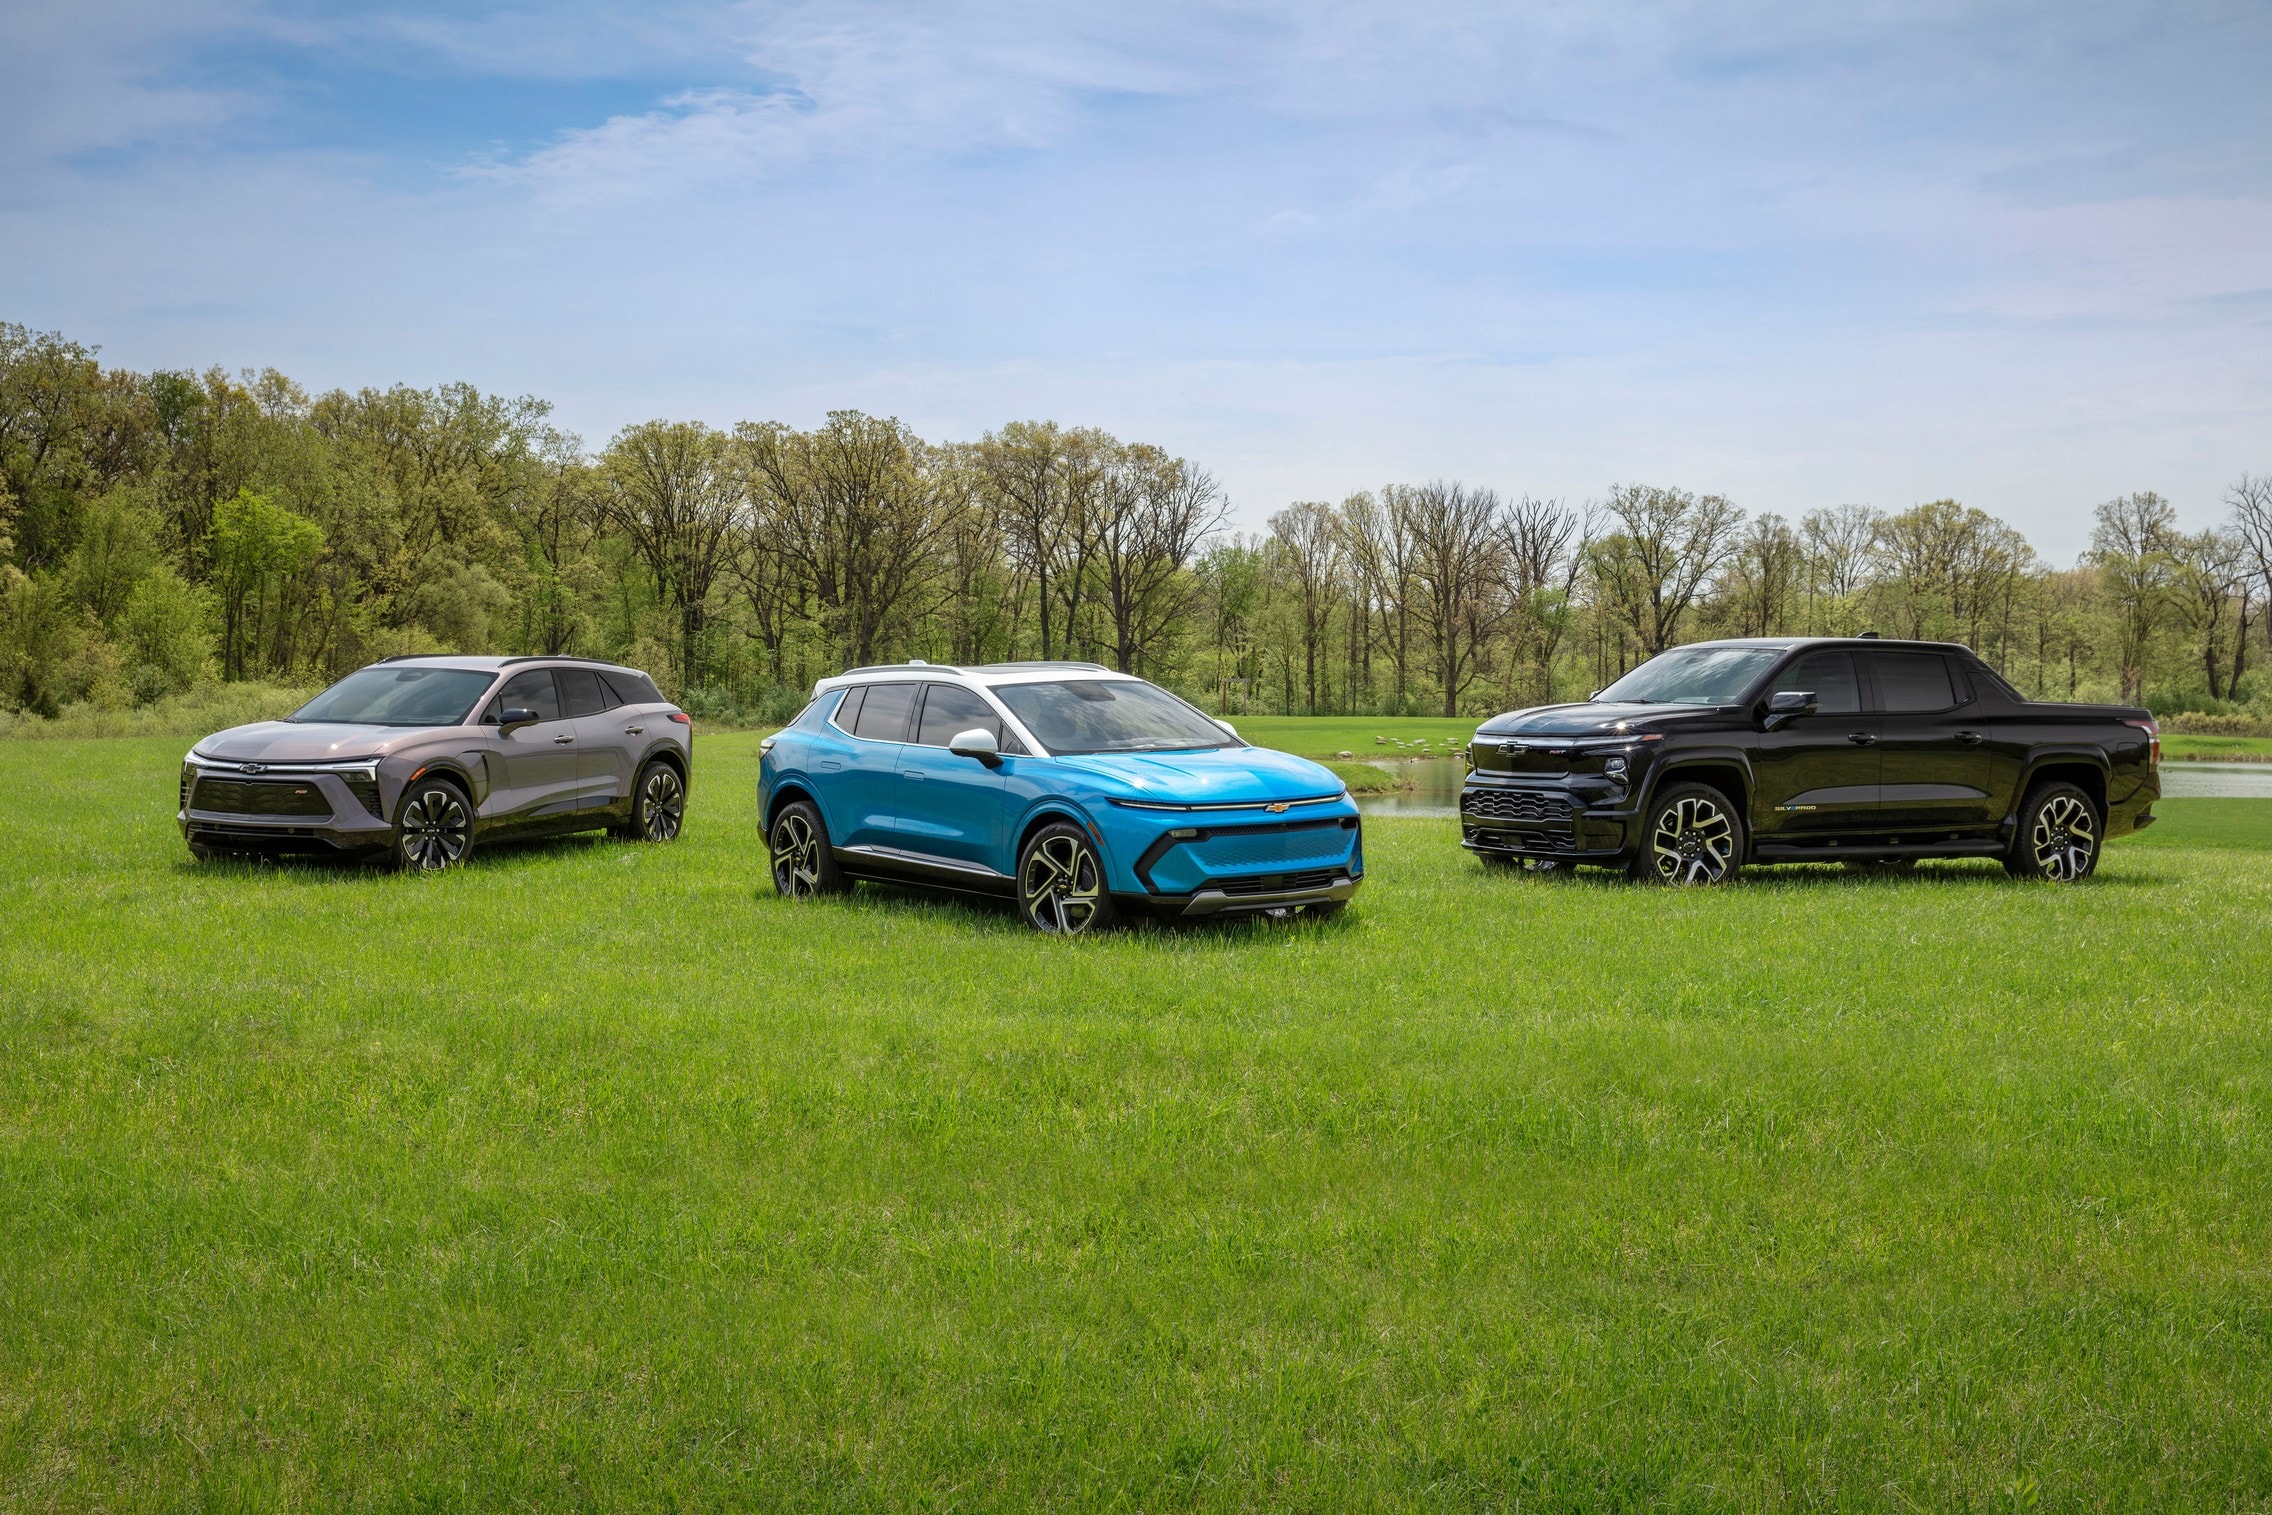 GM's Electric Vehicle Lineup